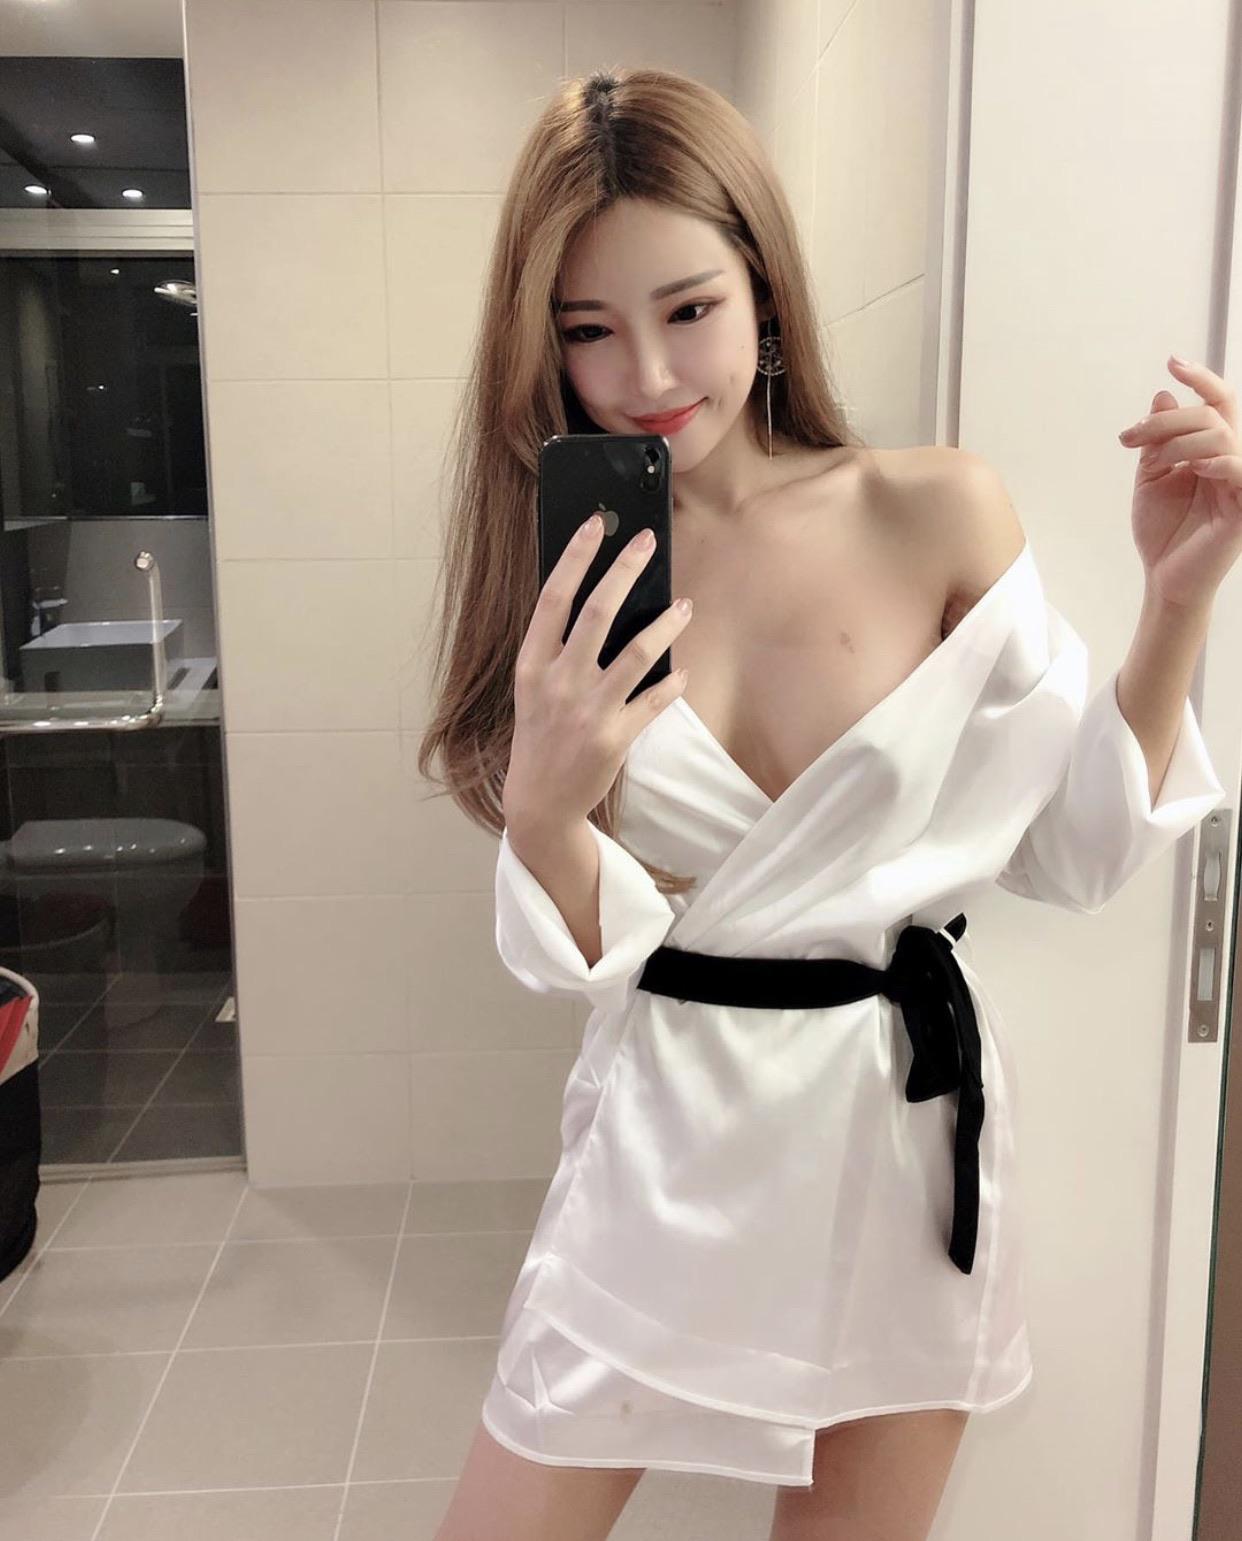 Just Girls Being as Sexy as They Want #2 Asian Edition